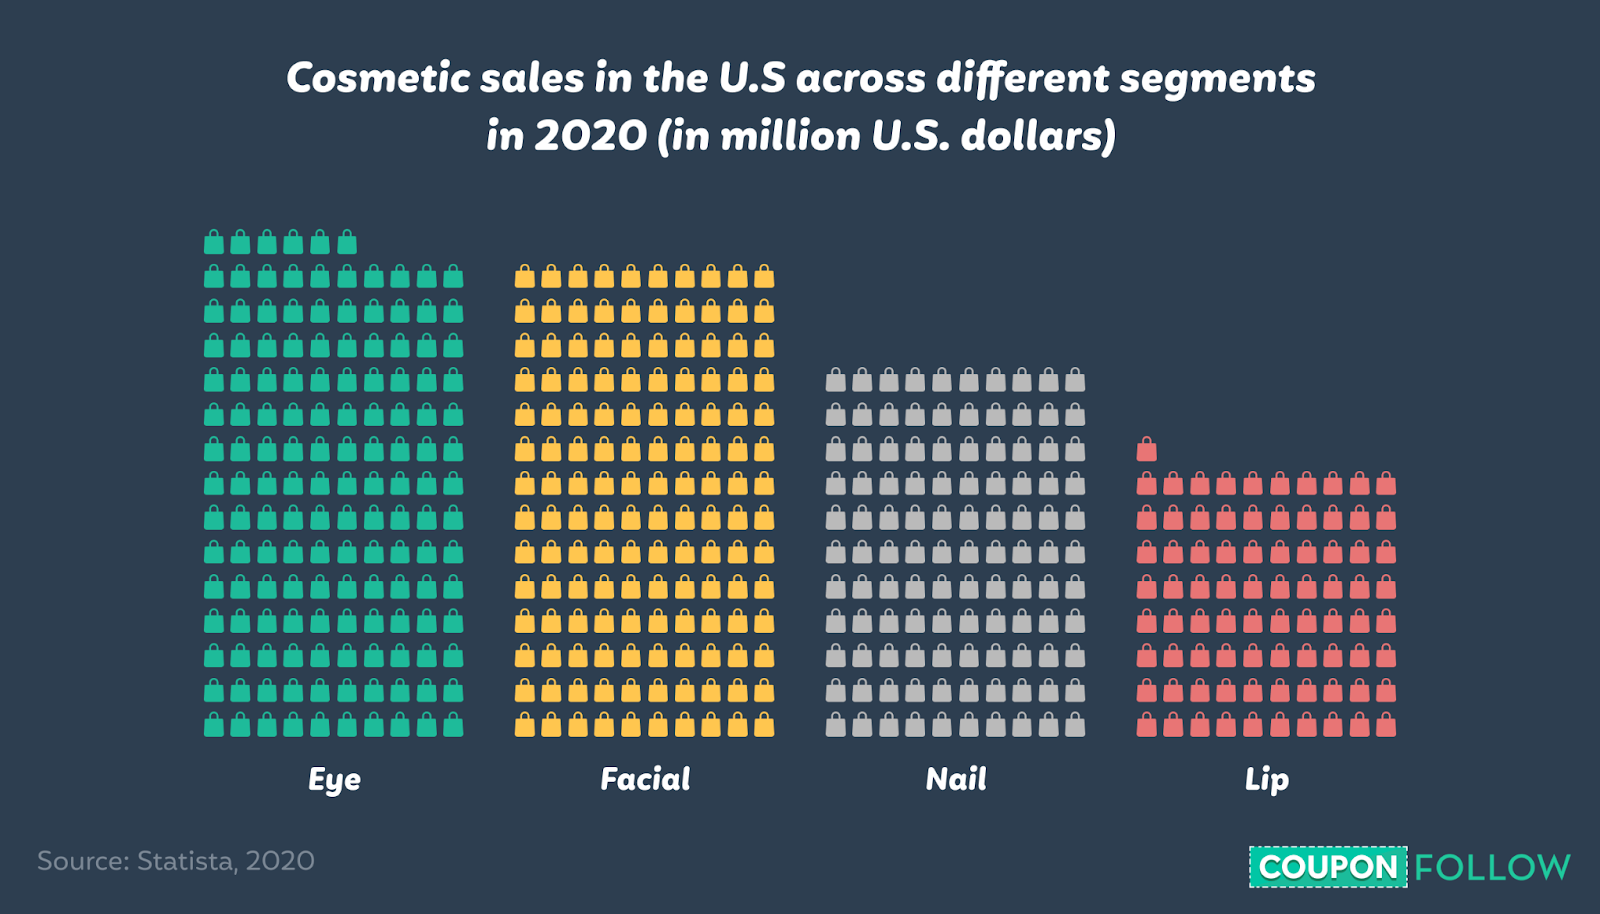 graph showing cosmetic sales across different segments in the US in 2020